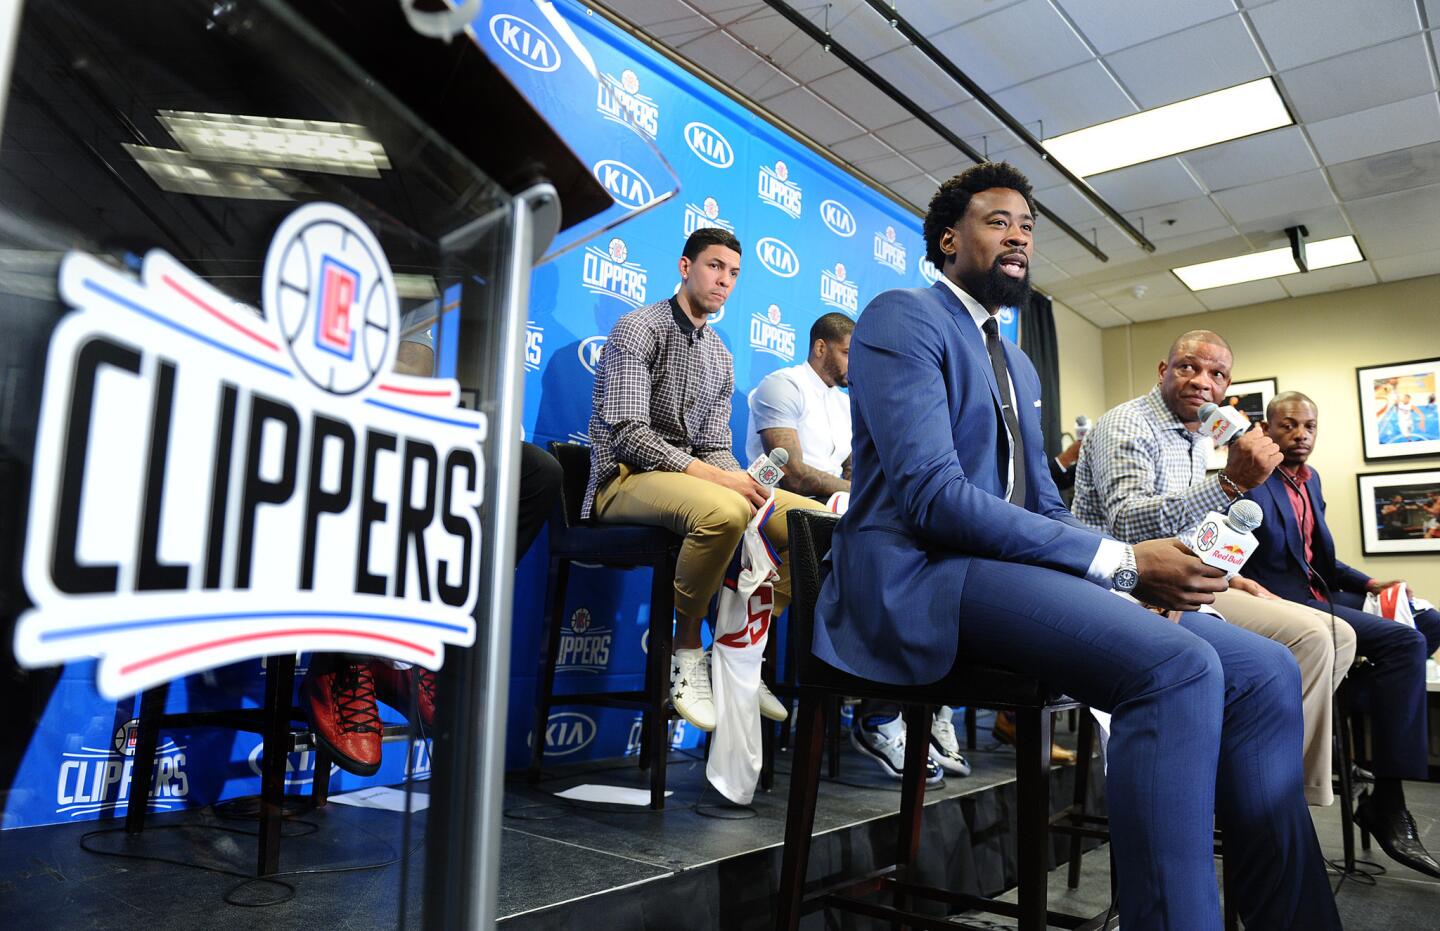 Clippers center DeAndre Jordan speaks during a news conference Tuesday at Staples Center.